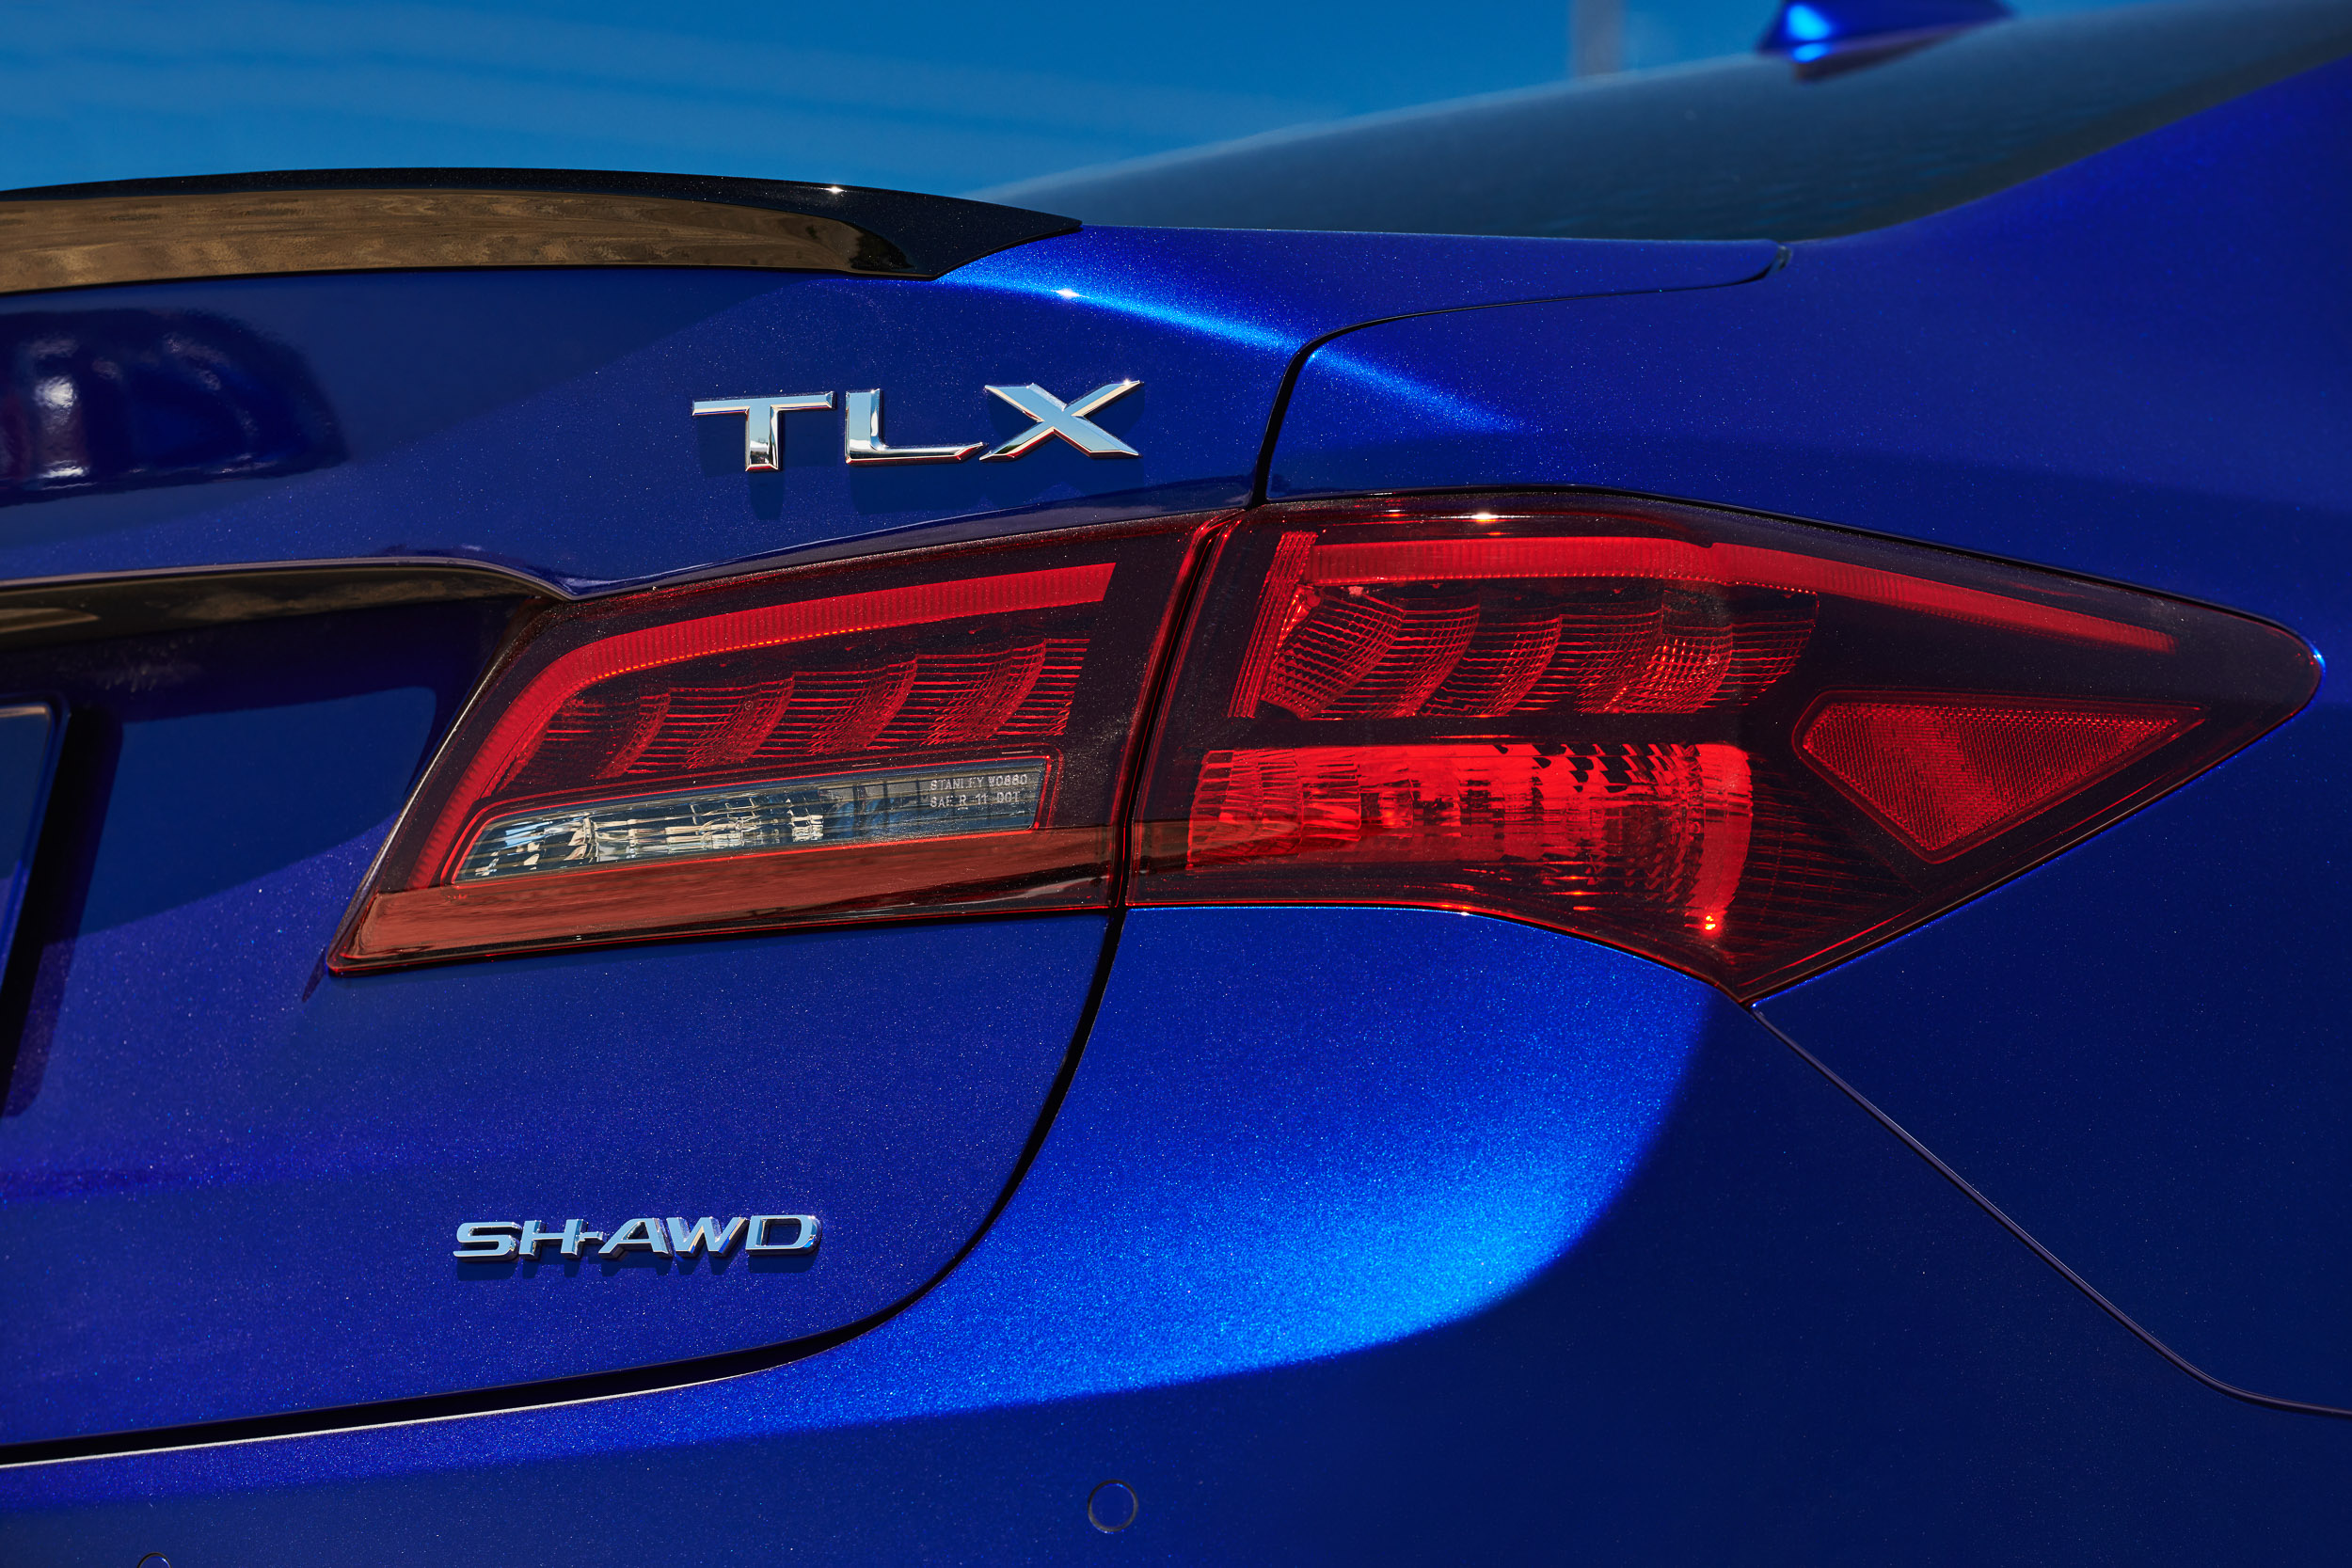 201904-BJP-Acura-day02-tlx-ext-002132-2